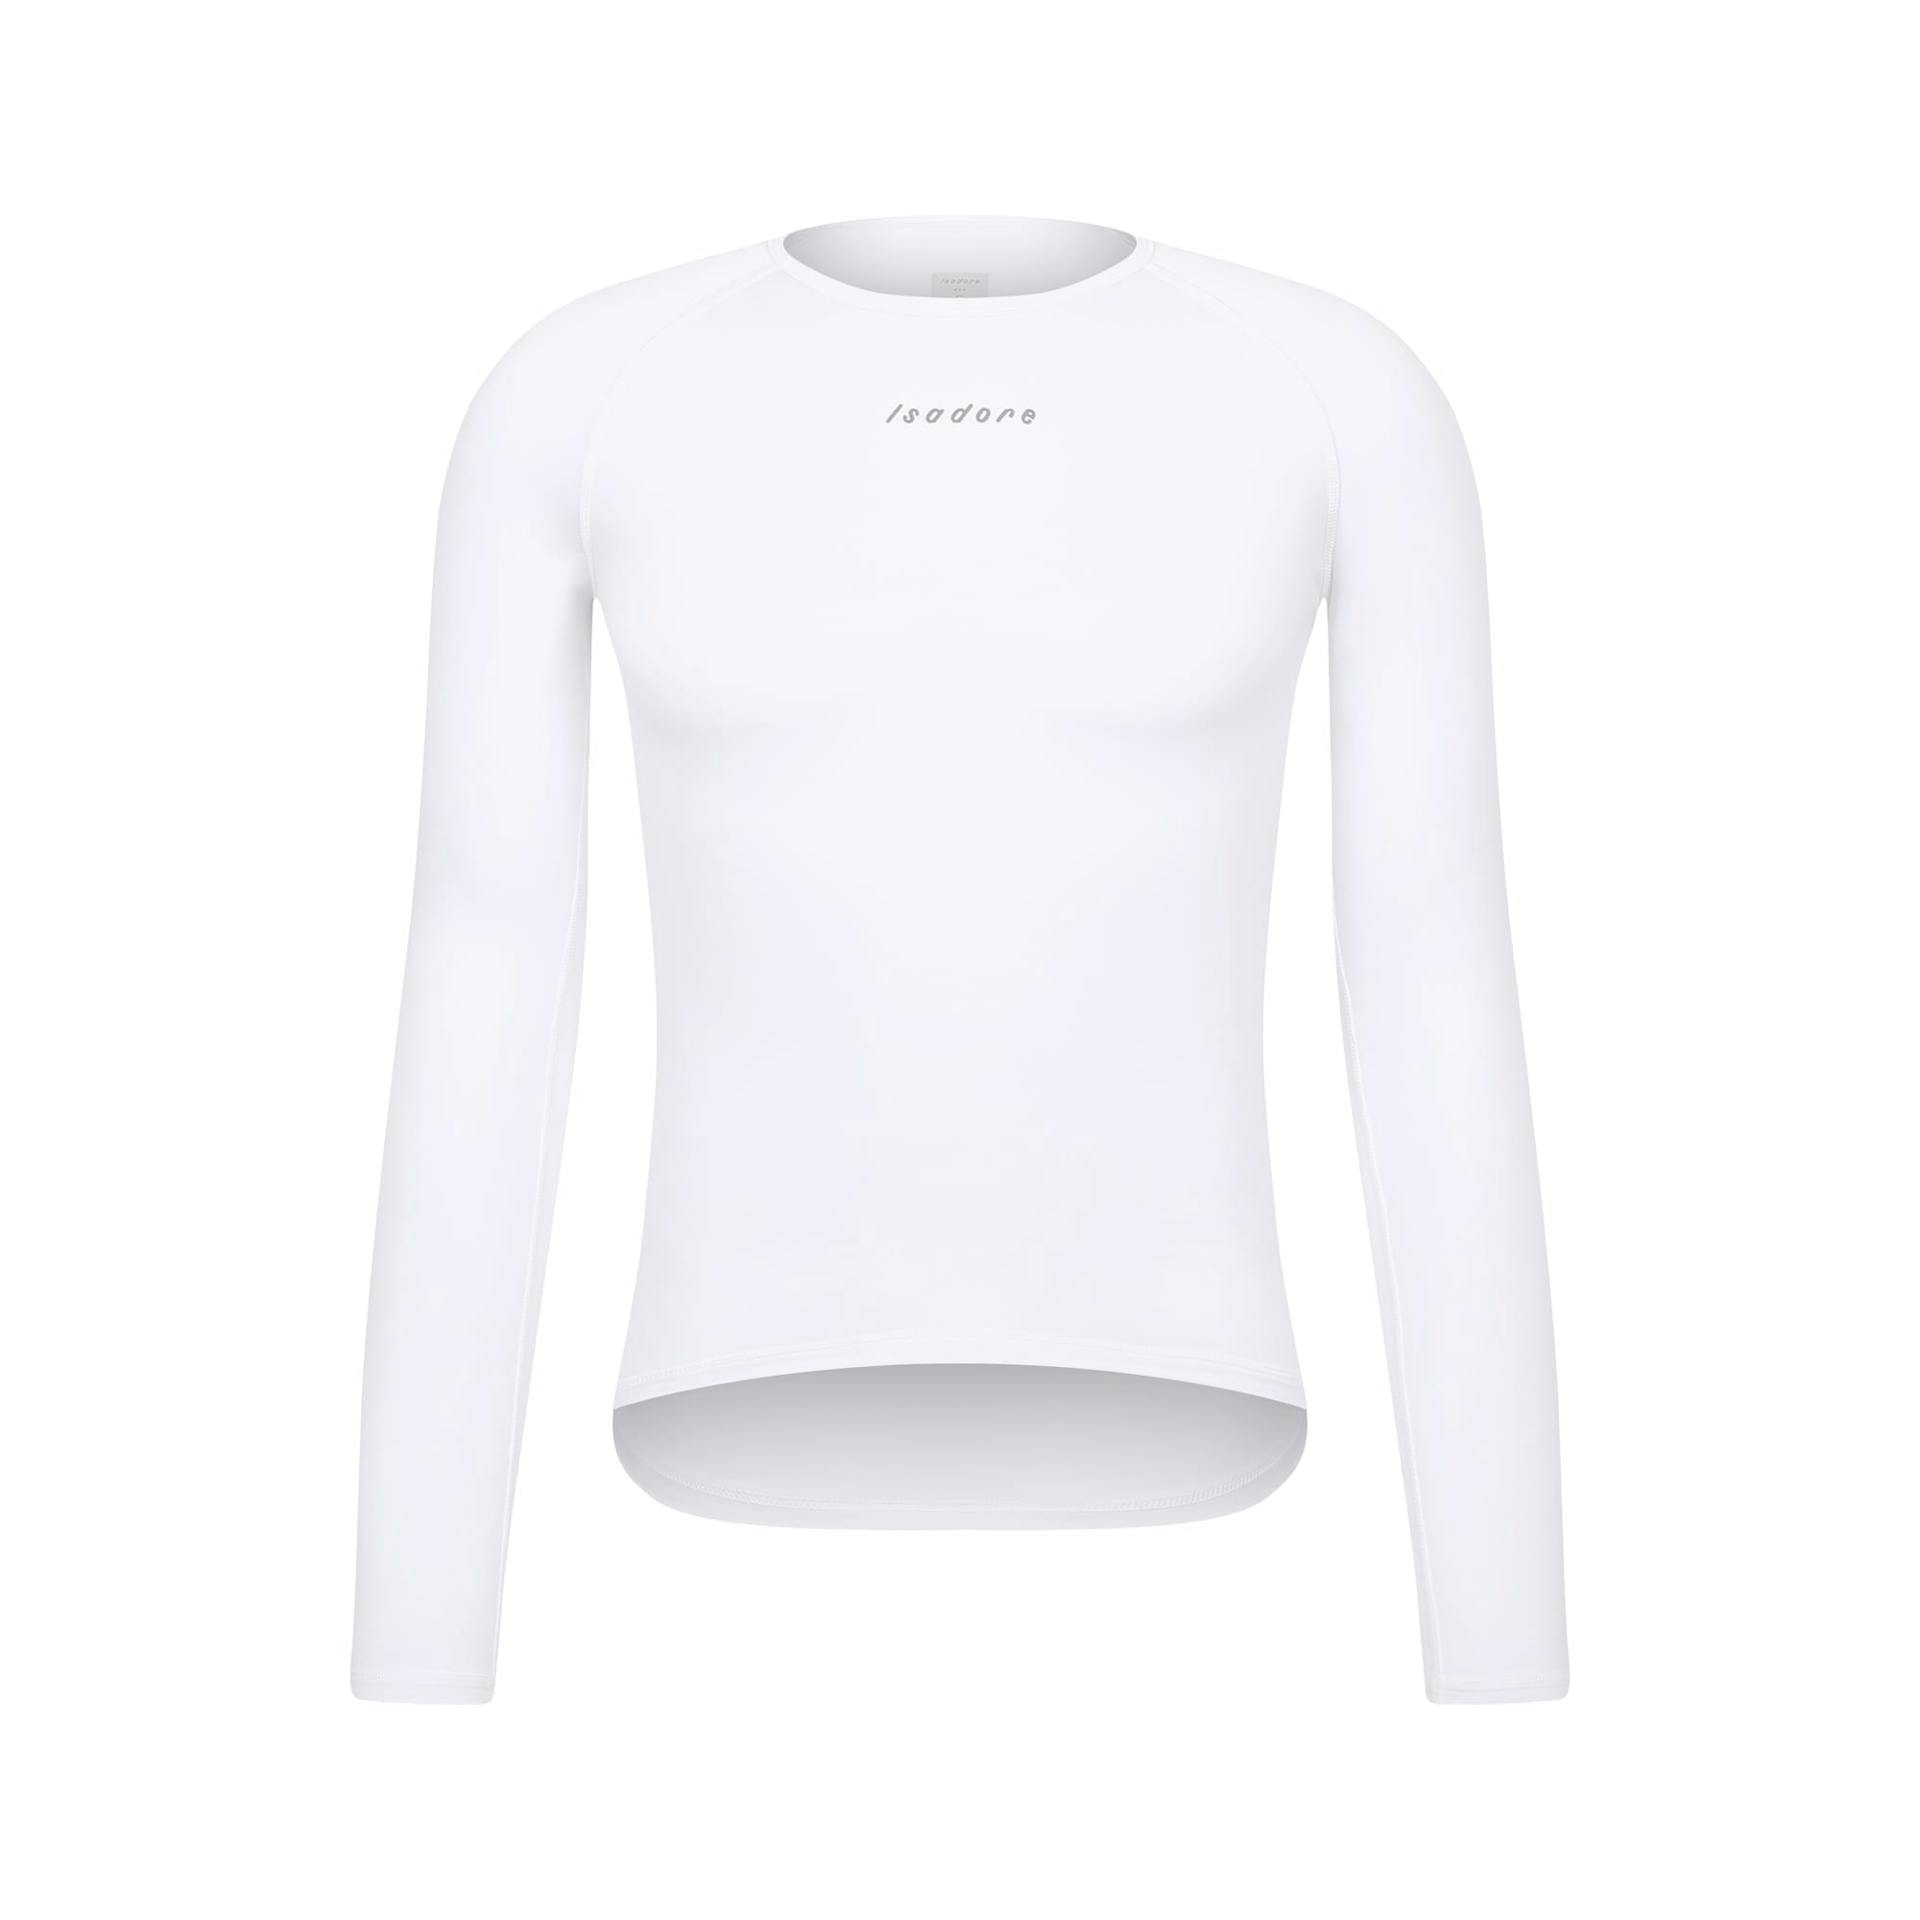 Thermal Long Sleeve Baselayer - White, Isadore